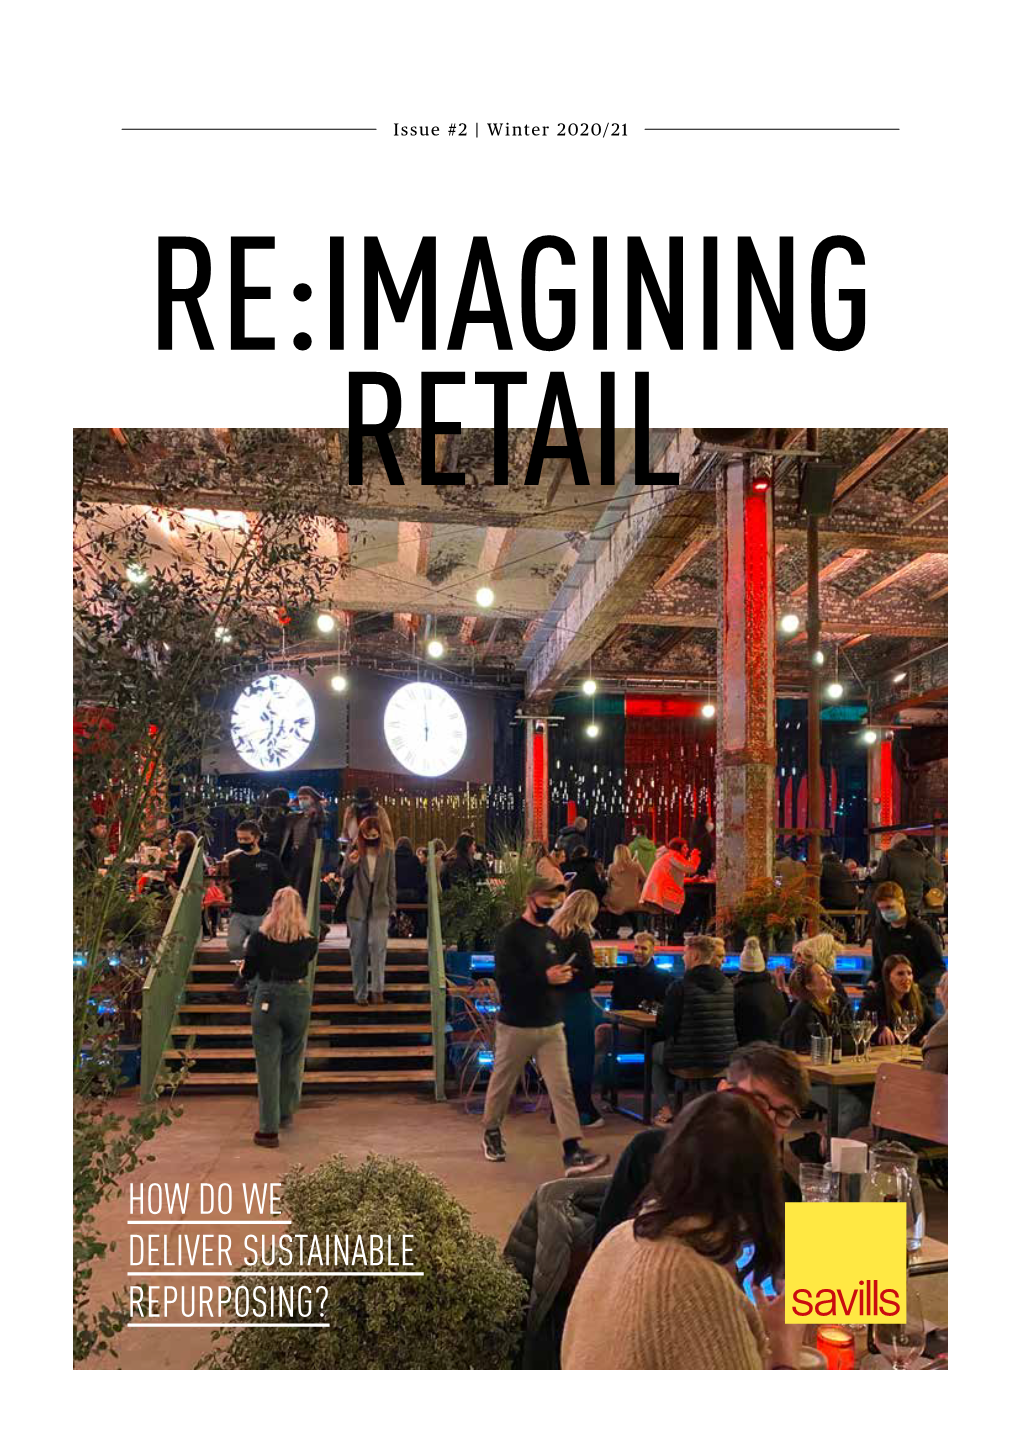 How Do We Deliver Sustainable Repurposing? Re:Imagining Retail Contents